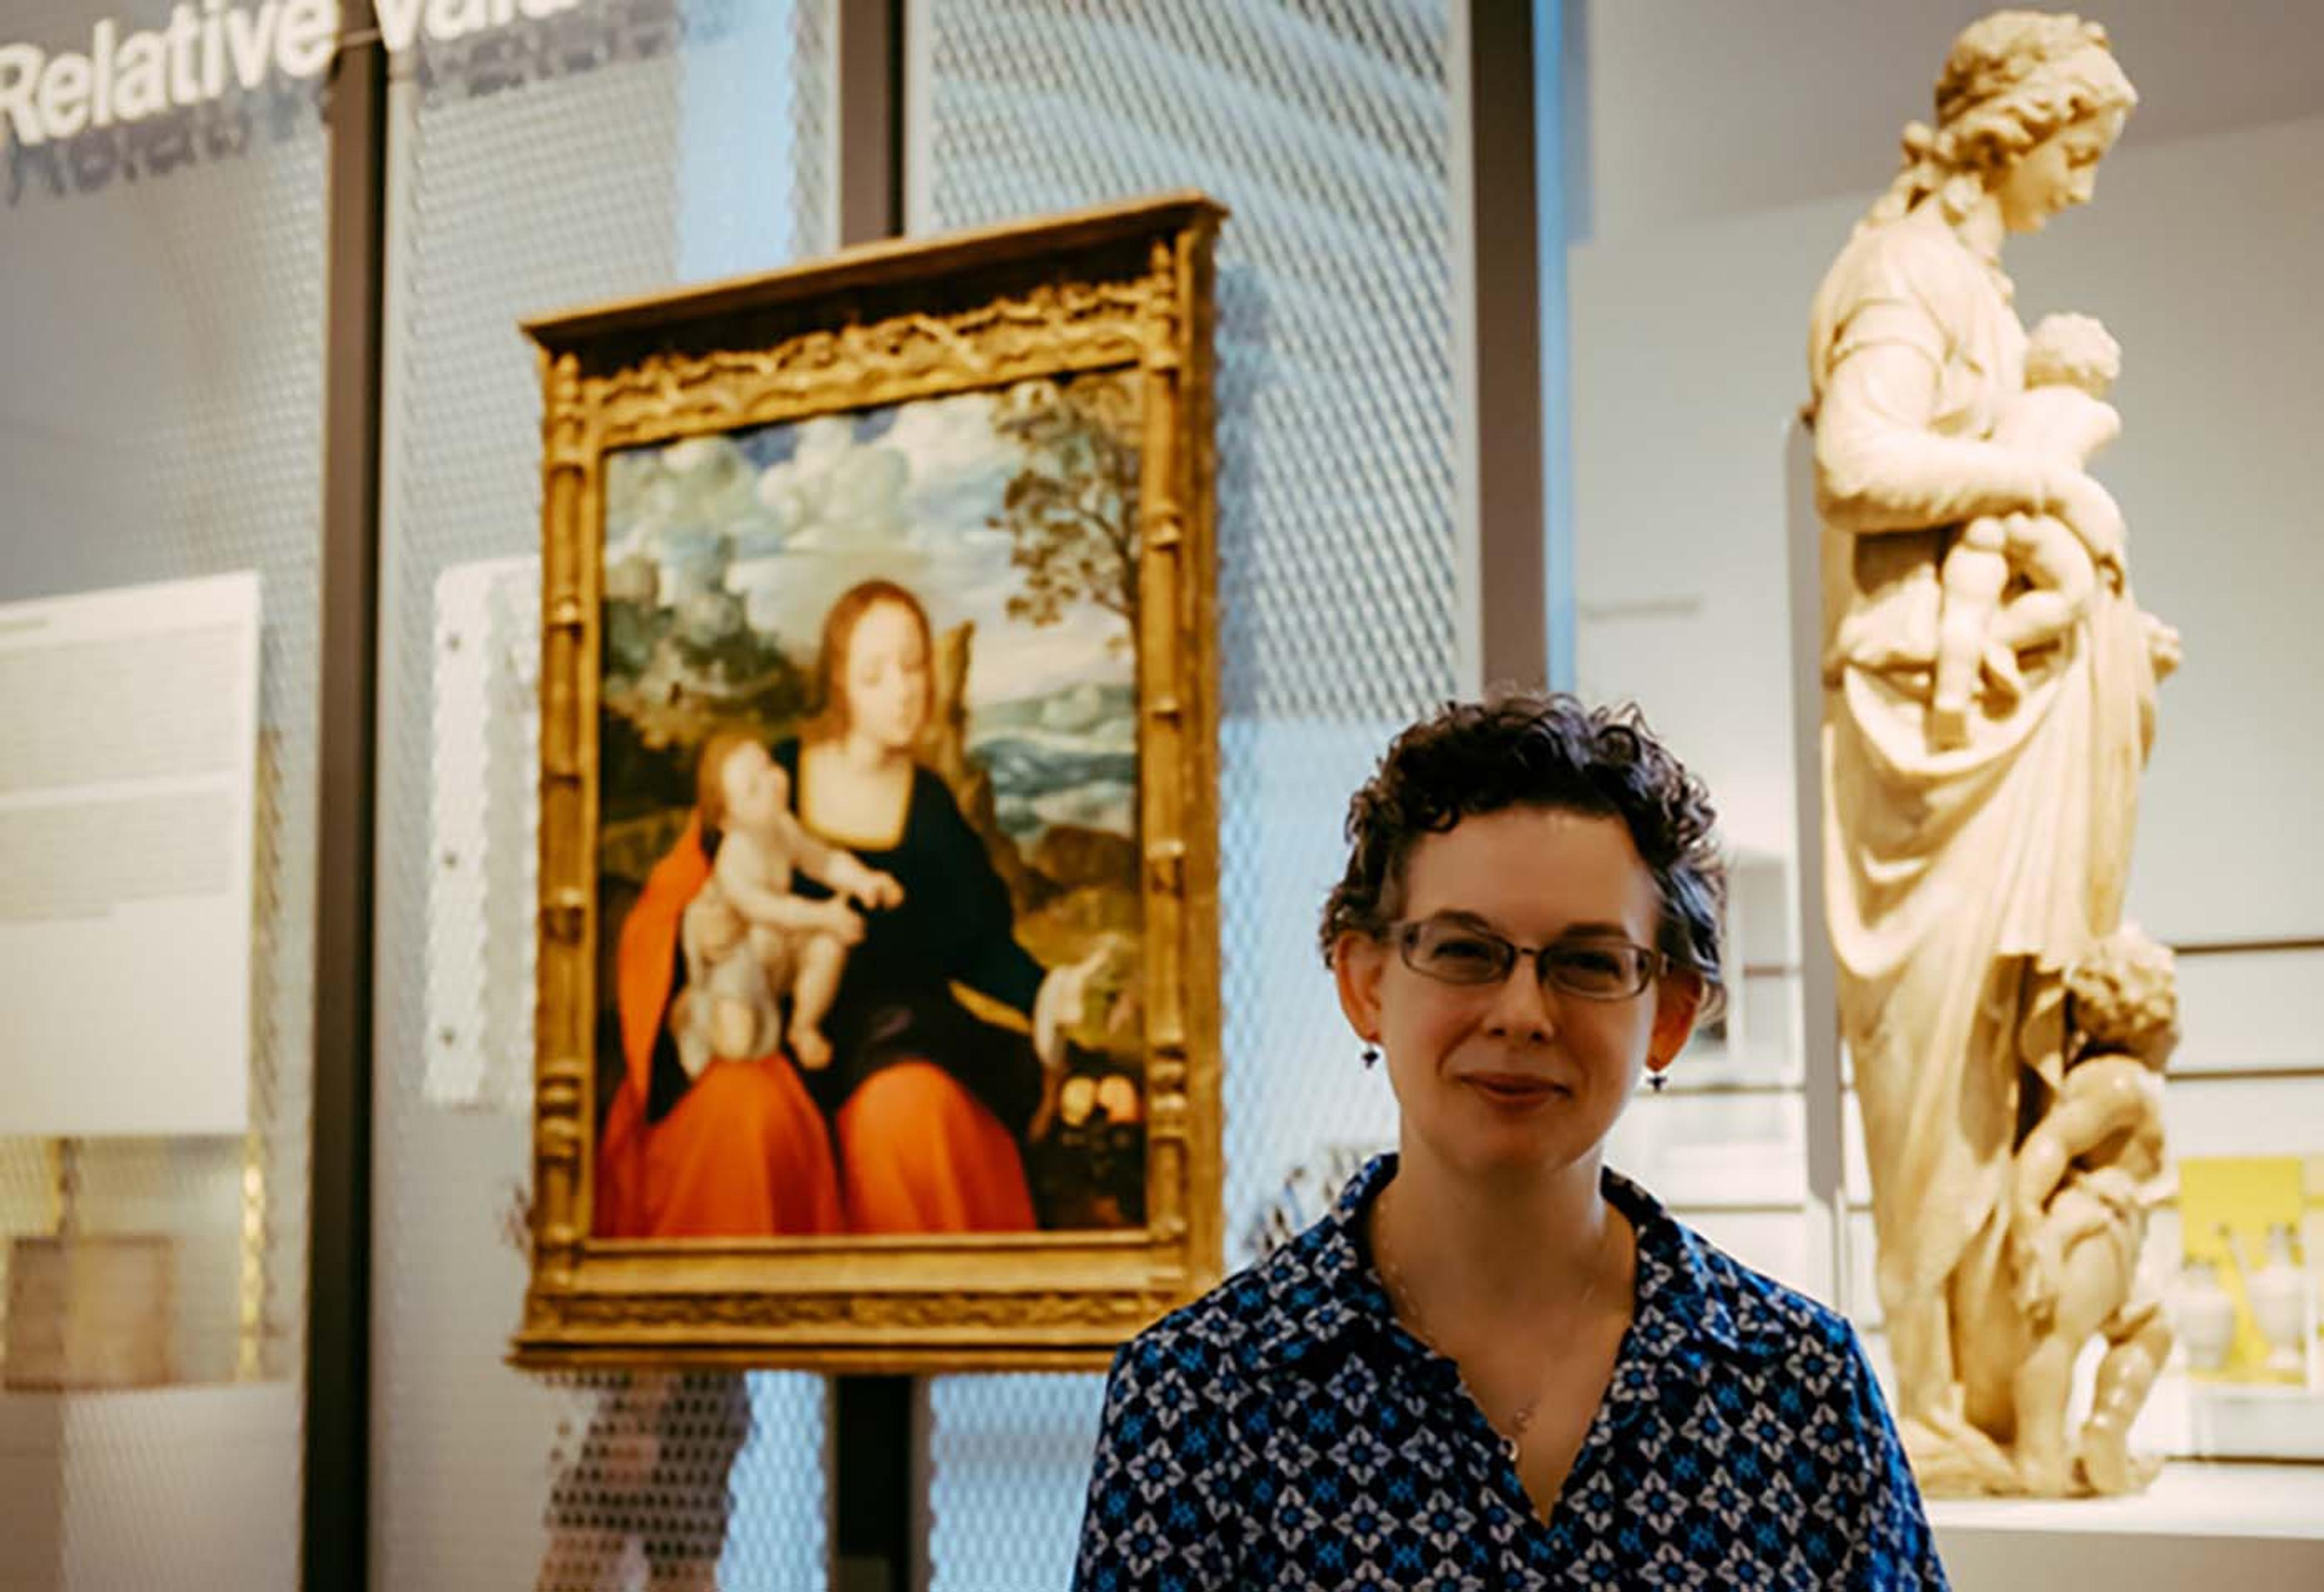 Curator Elizabeth Cleland standing in front of objects in Relative Values exhibition at The Met Fifth Avenue